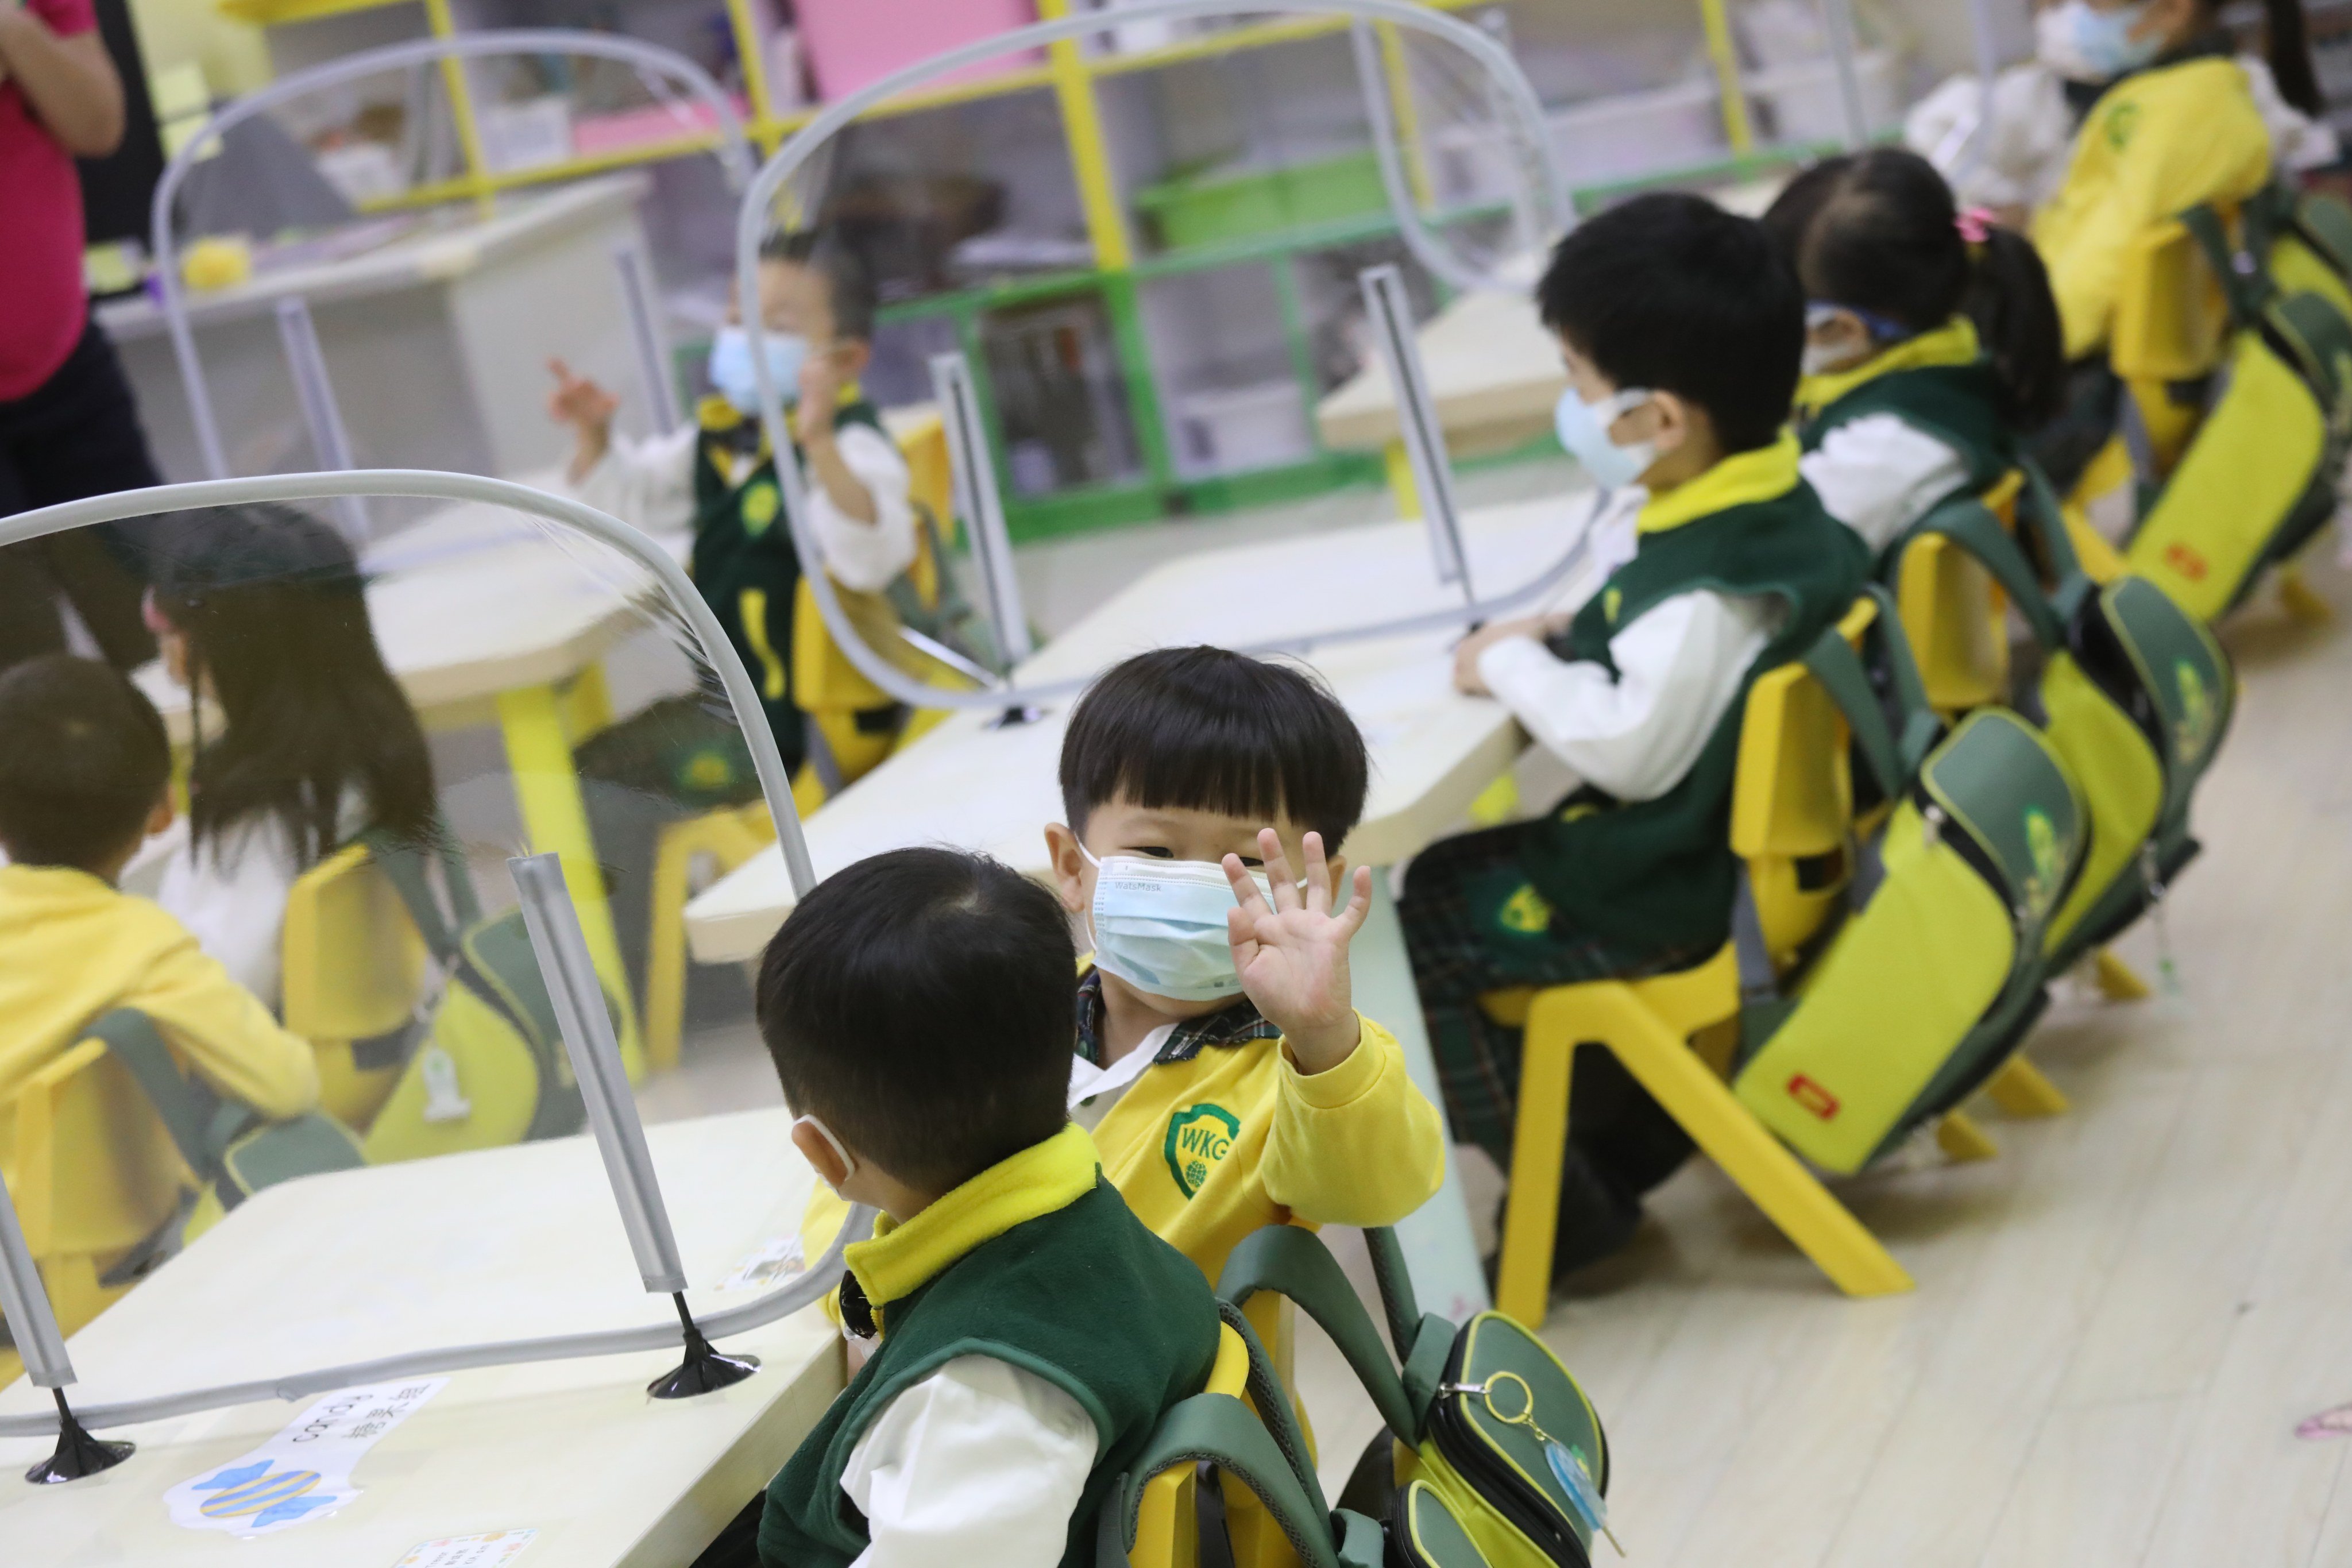 Children at a kindergarten in Tuen Mun on Febreuary 22. Learning from schools that have successful immersive environments should give teachers the confidence to nurture children of all backgrounds. Photo: K. Y. Cheng